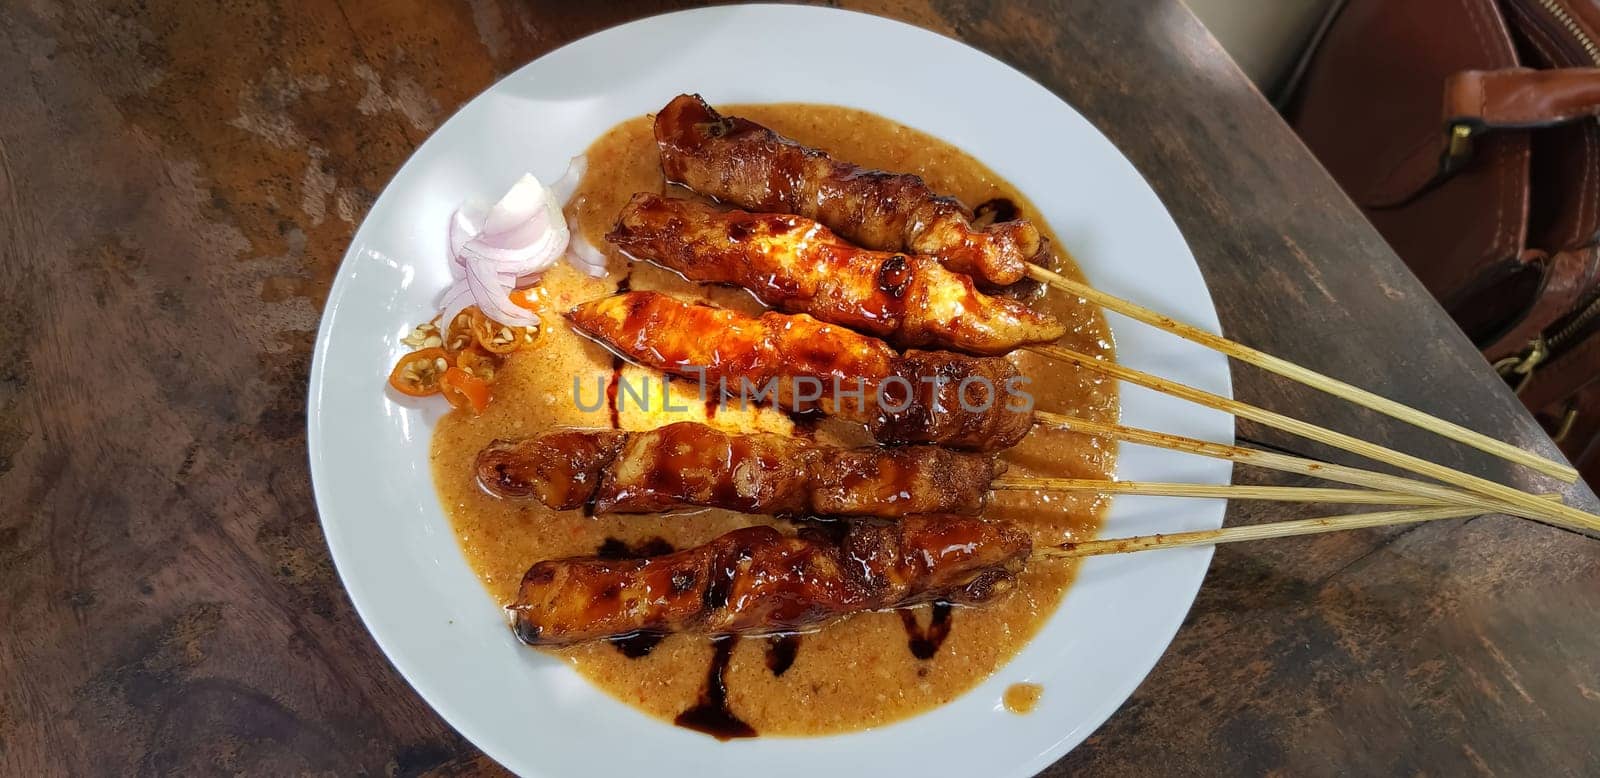 Chicken satay or Indonesian sate ayam, grilled chicken satay with peanut and soy sauce completed with chili and onion, indonesian delicacy